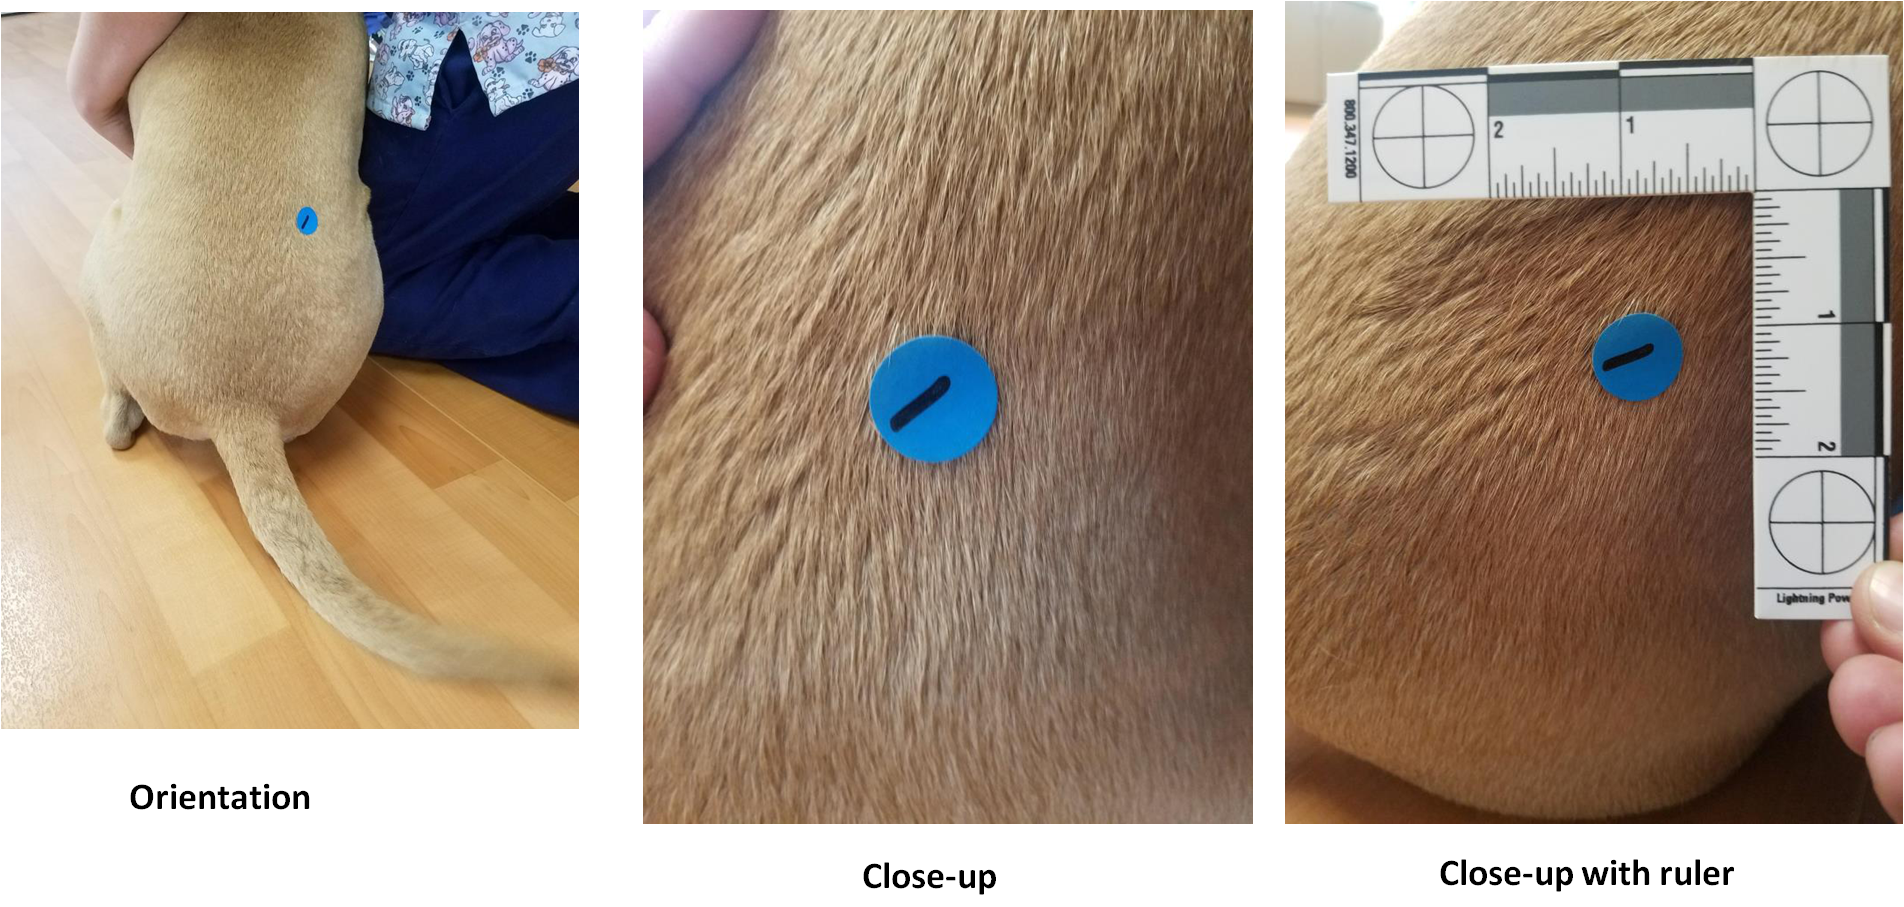 Orientation, close-up without ruler, and close-up with ruler photographs of a lesion on a dog’s back